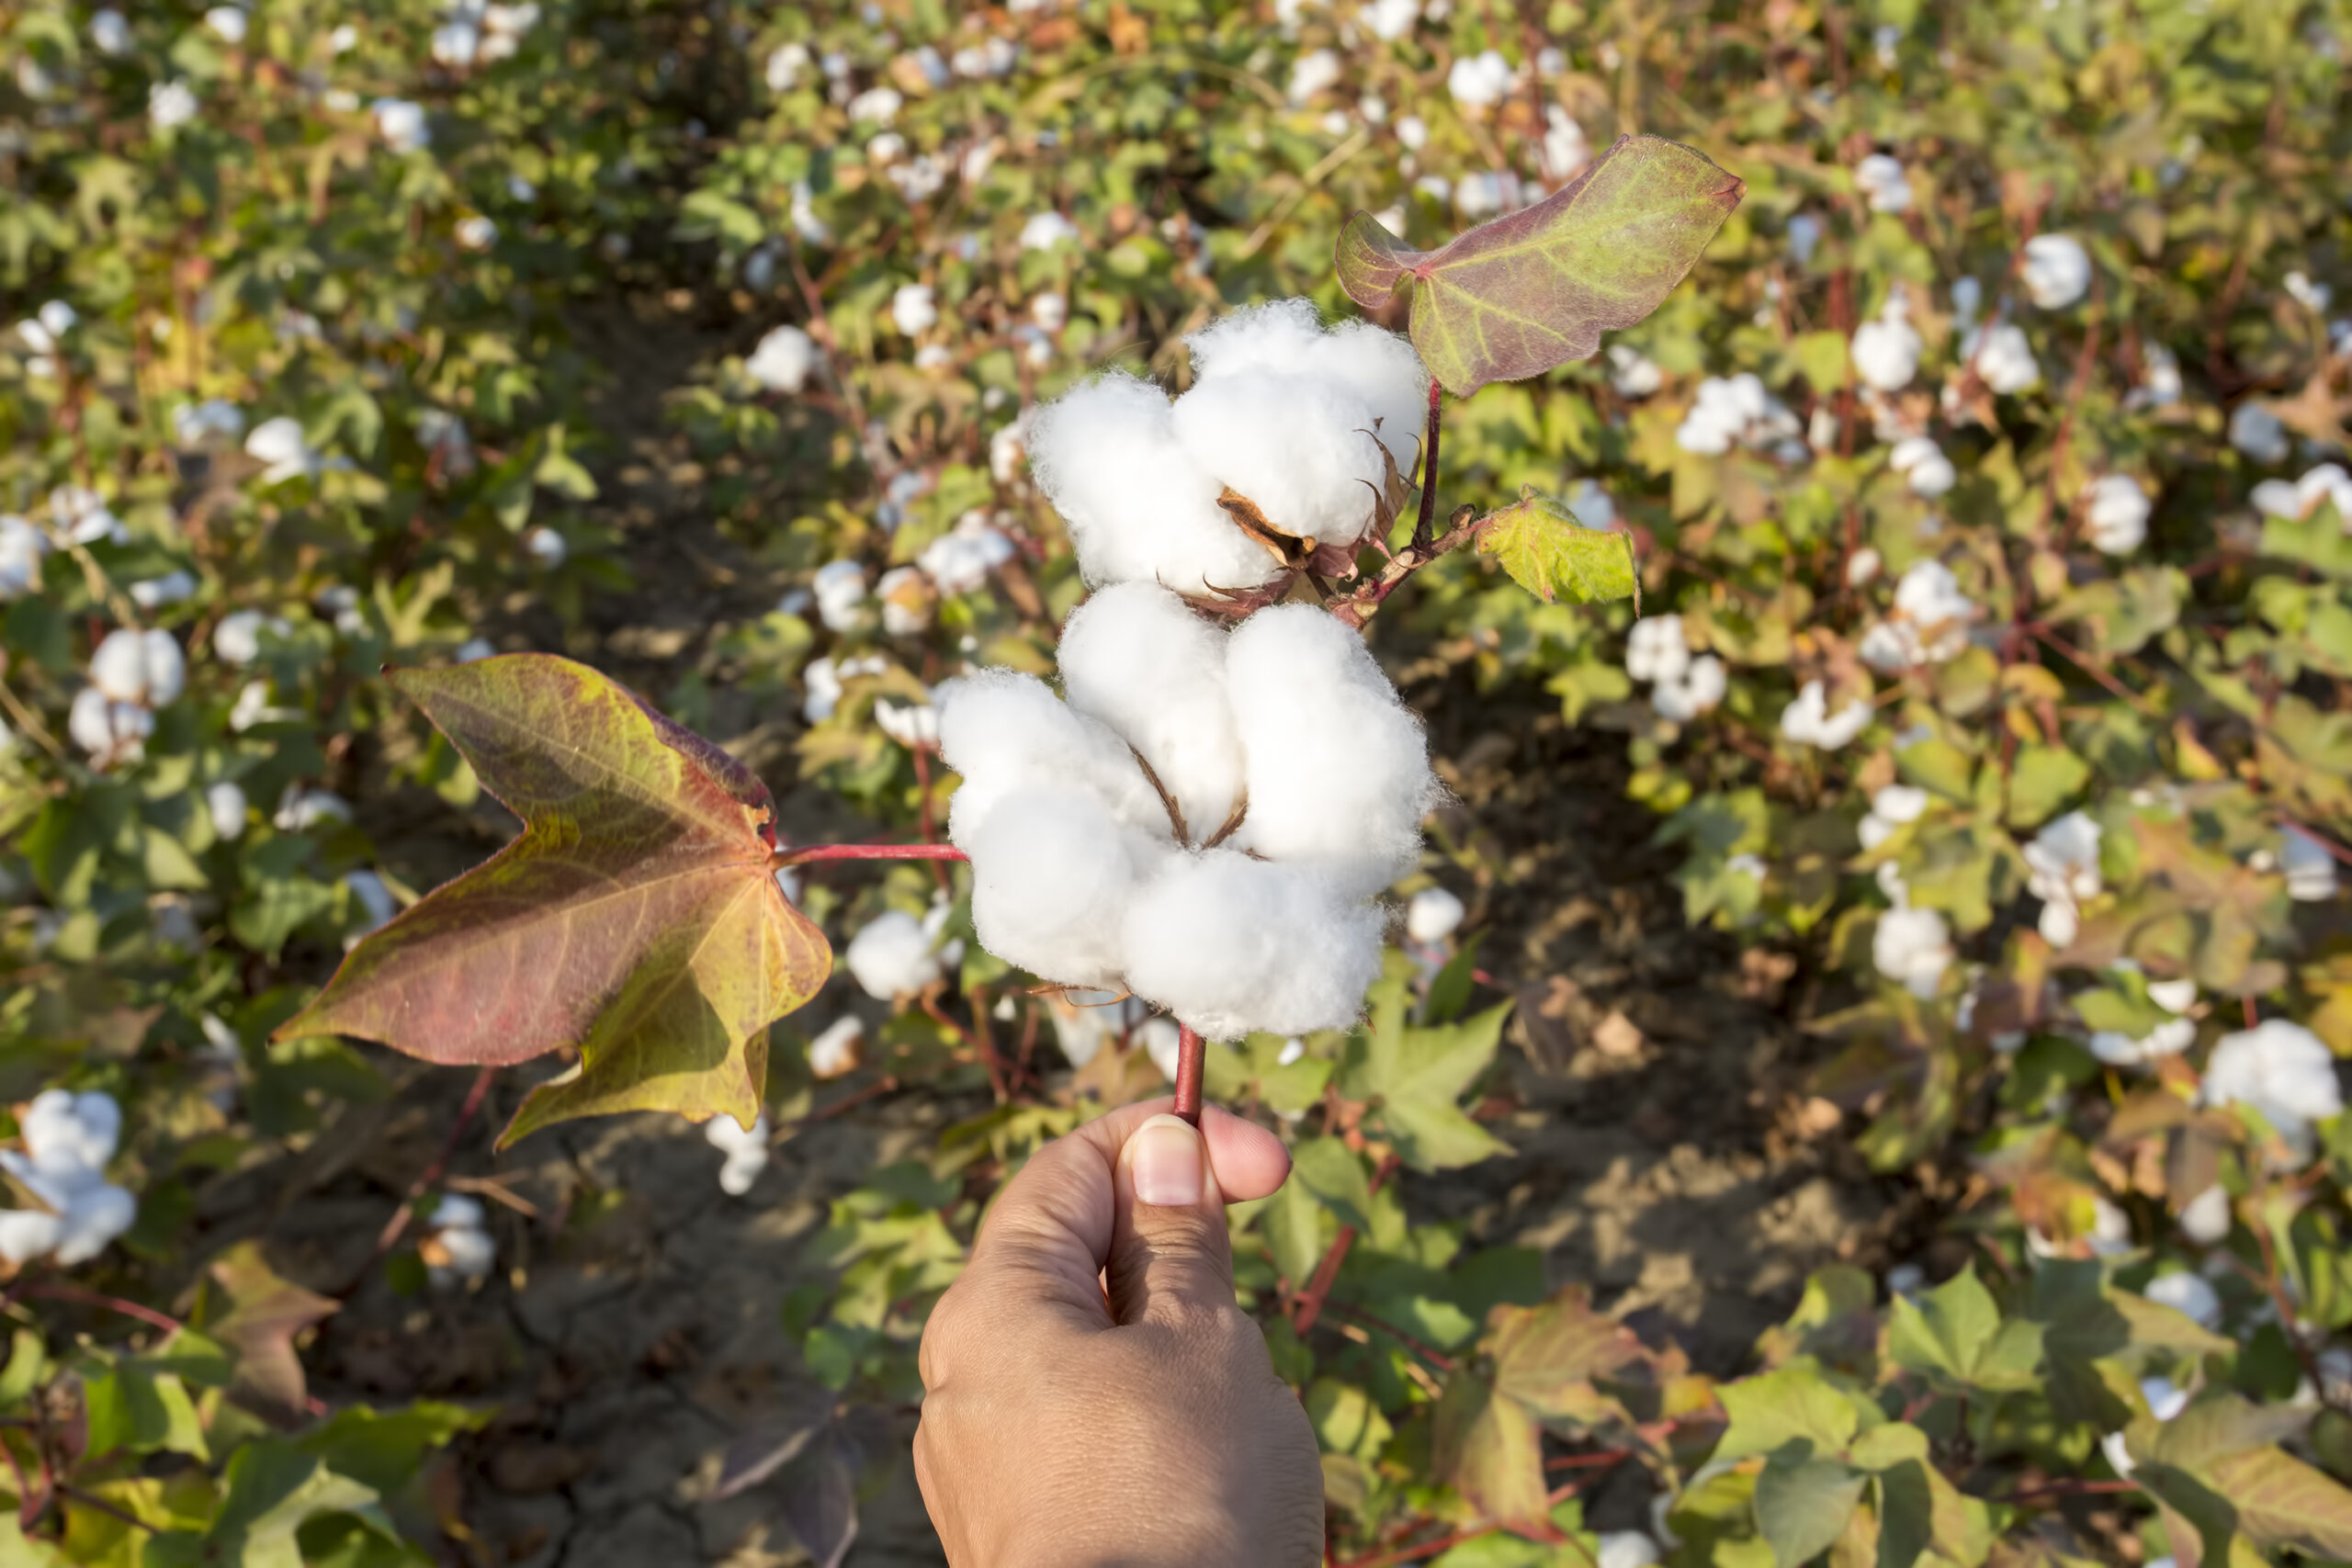 Cotton fields ready for harvesting, agriculture